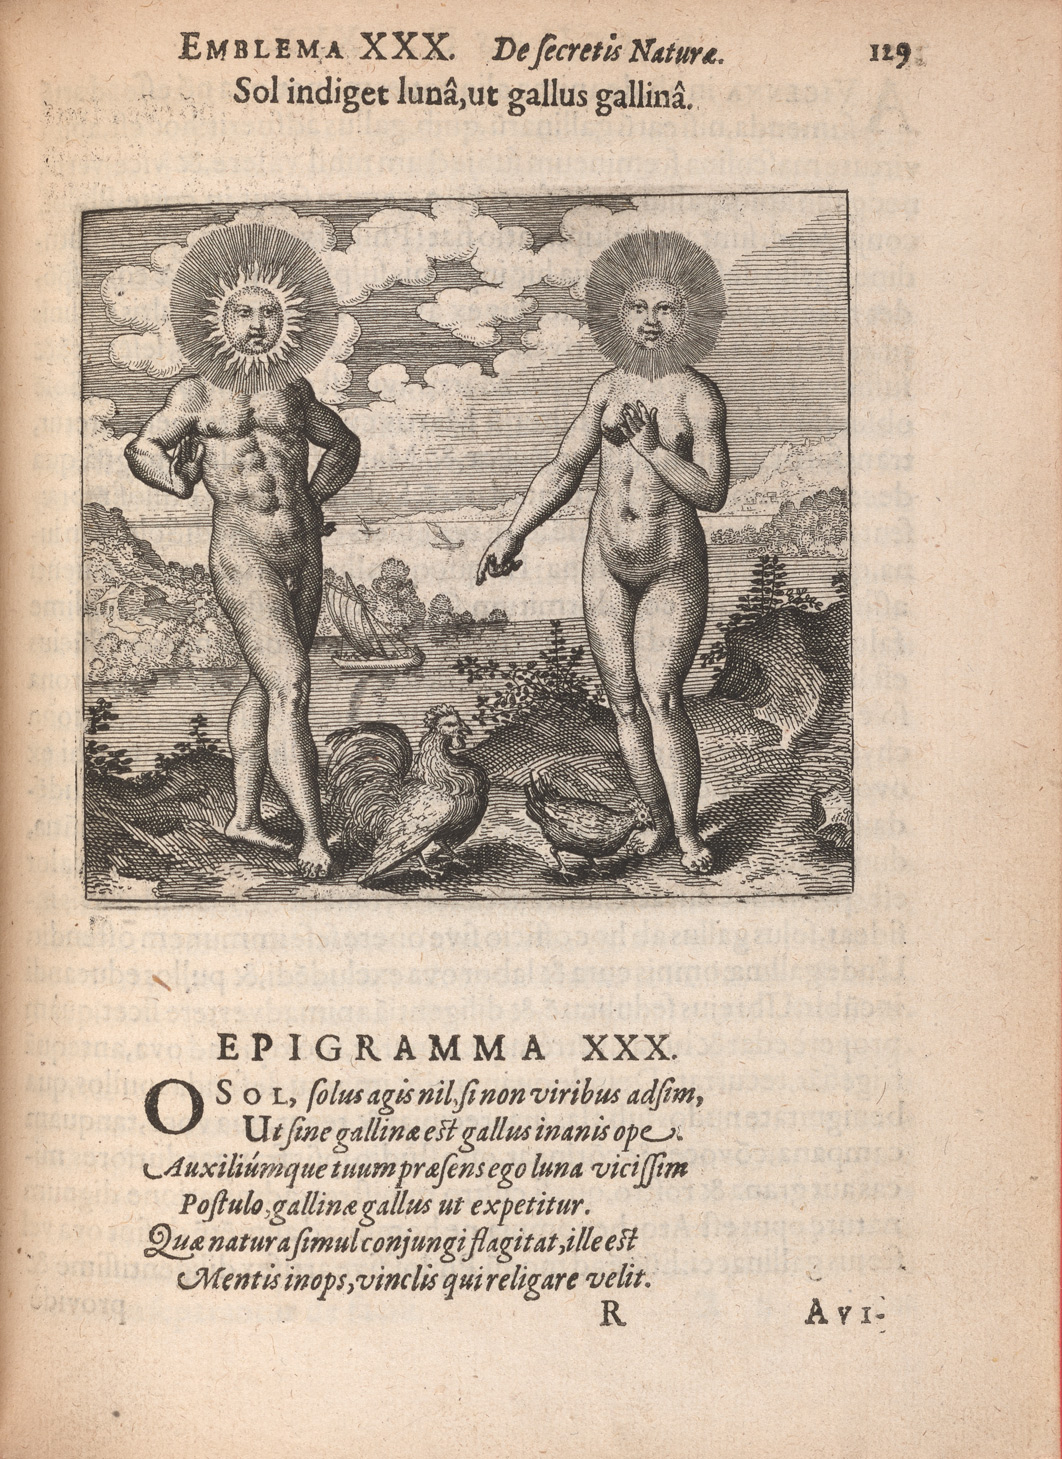 The second page of emblem 30 in Atalanta fugiens, which shows a motto and epigram in Latin and an image. The image shows a nude man with a sun for a head, identified as Sol, is standing next to a nude woman with a moon for a head, identified as Luna. She is pointing to the two chickens that are at their feet. Behind them are boats on a river.